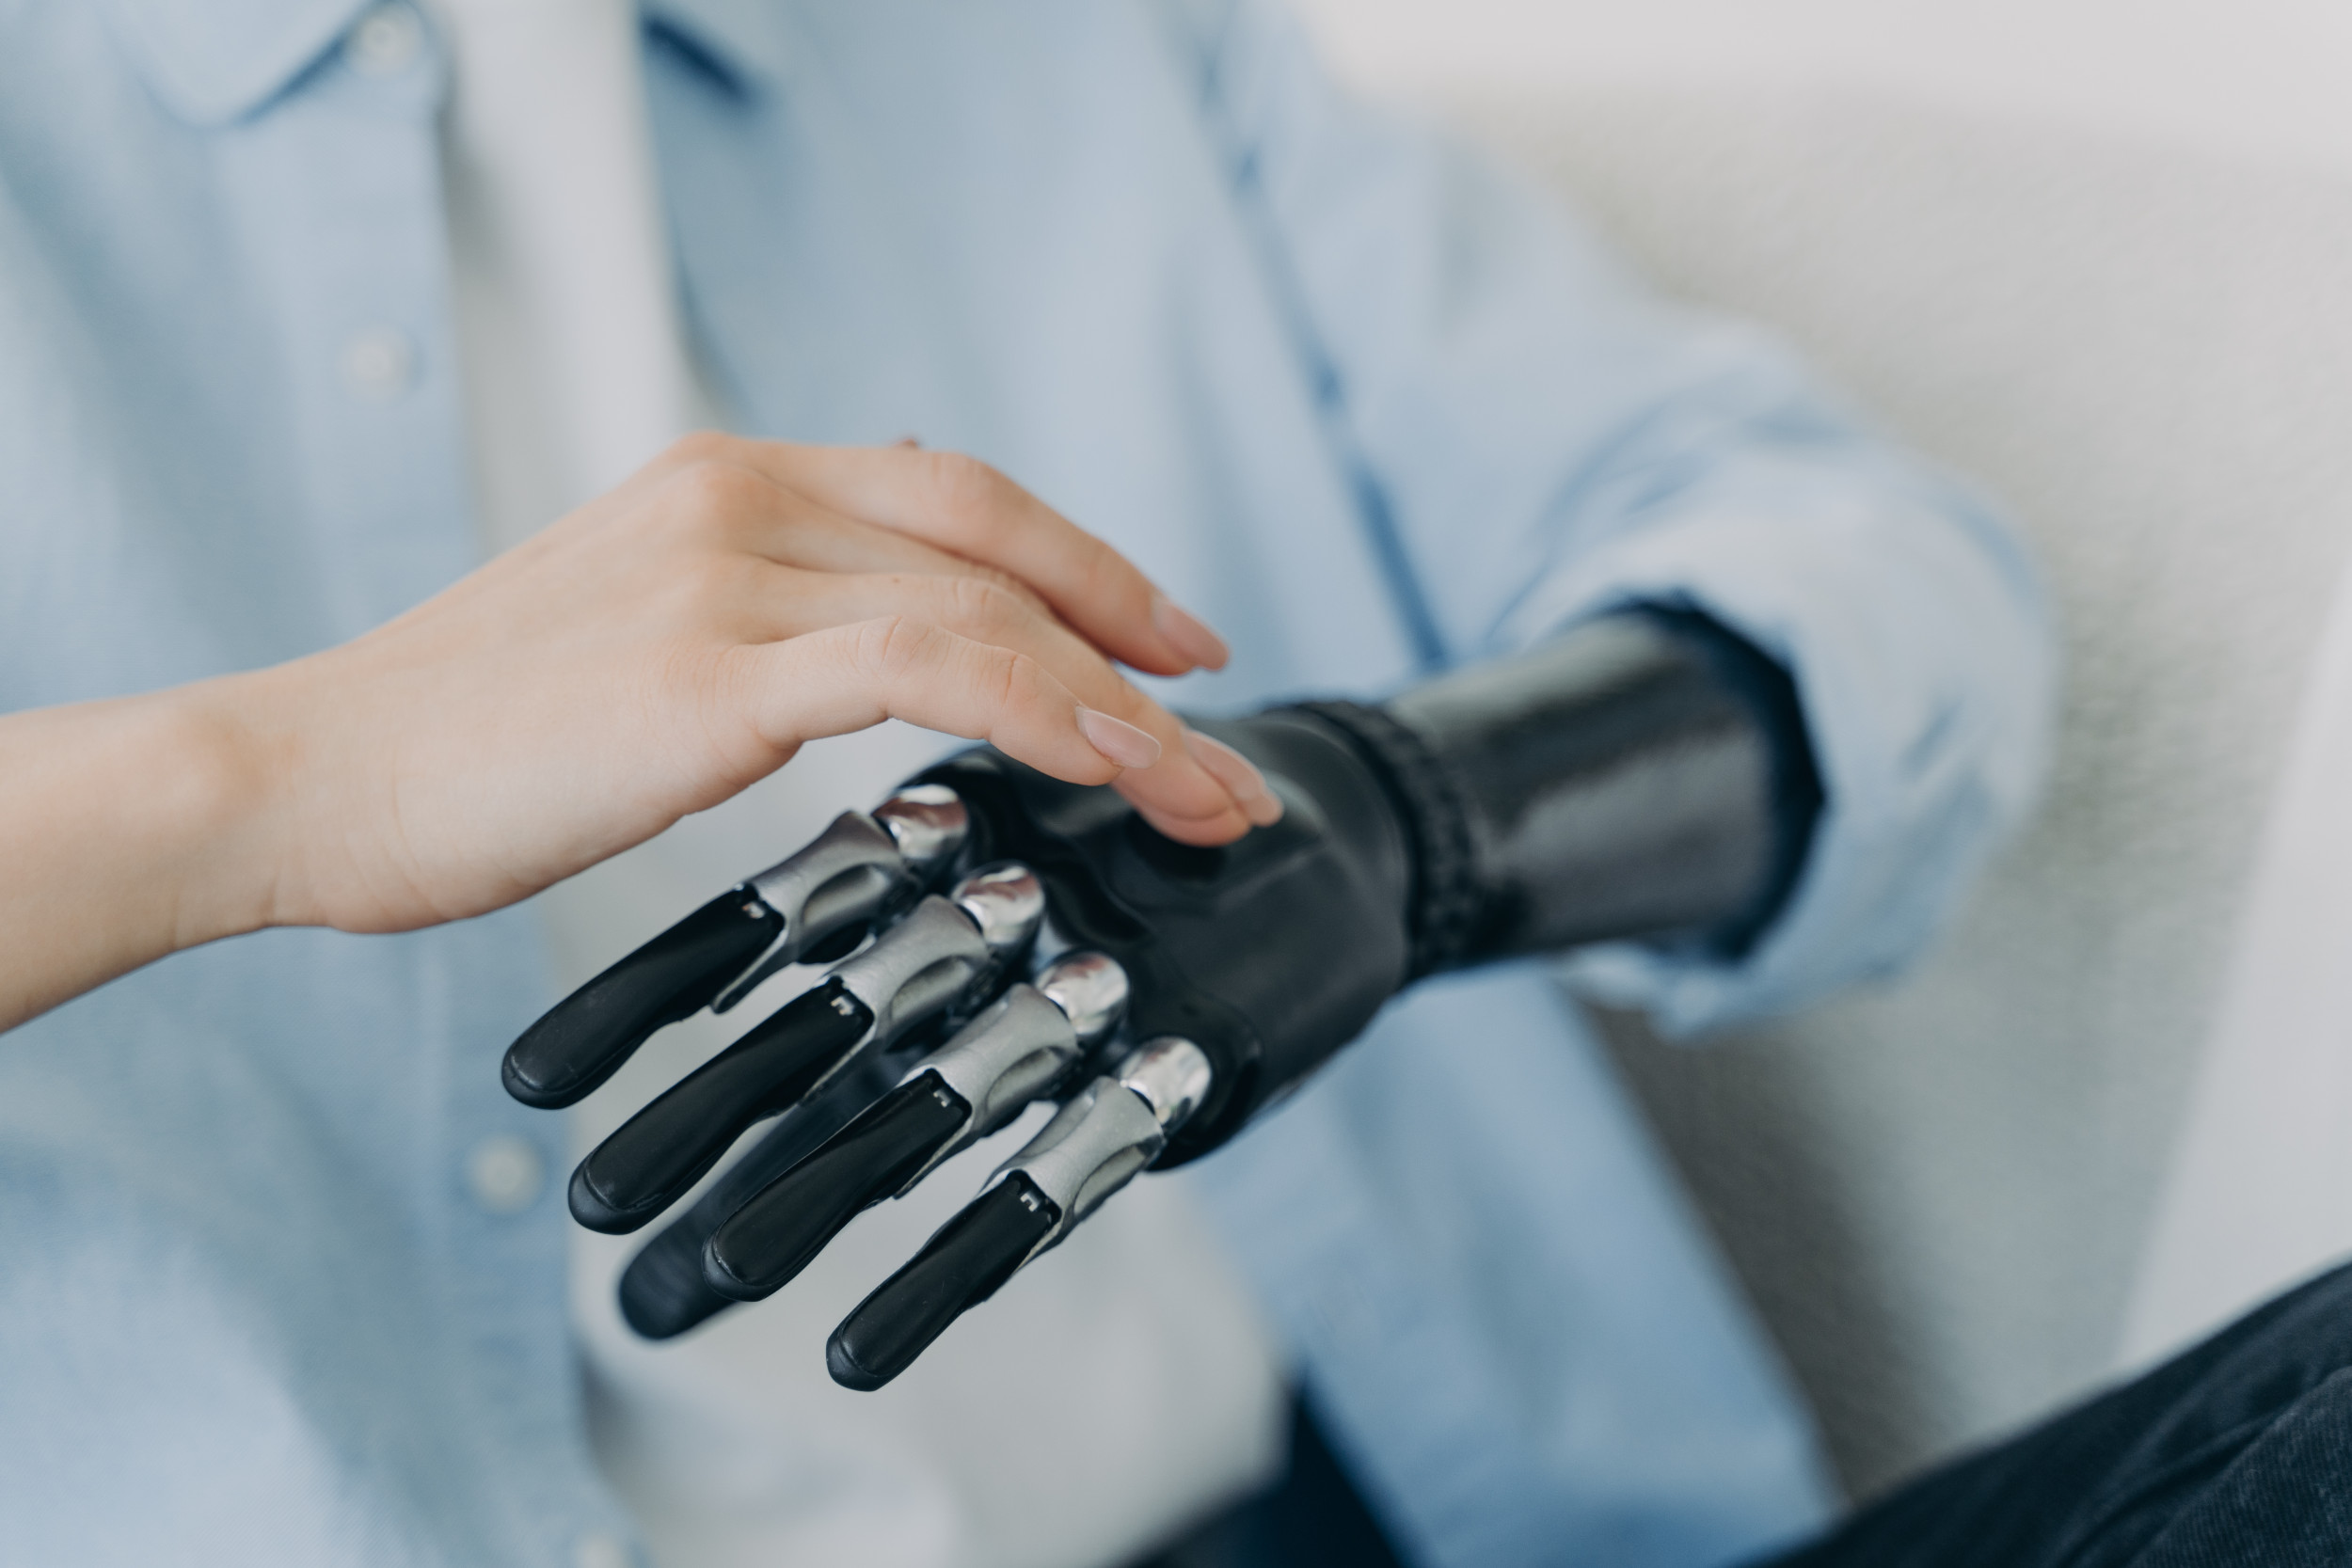 Man With Amputated Arm Gets Bionic Hand in Surgical Breakthrough